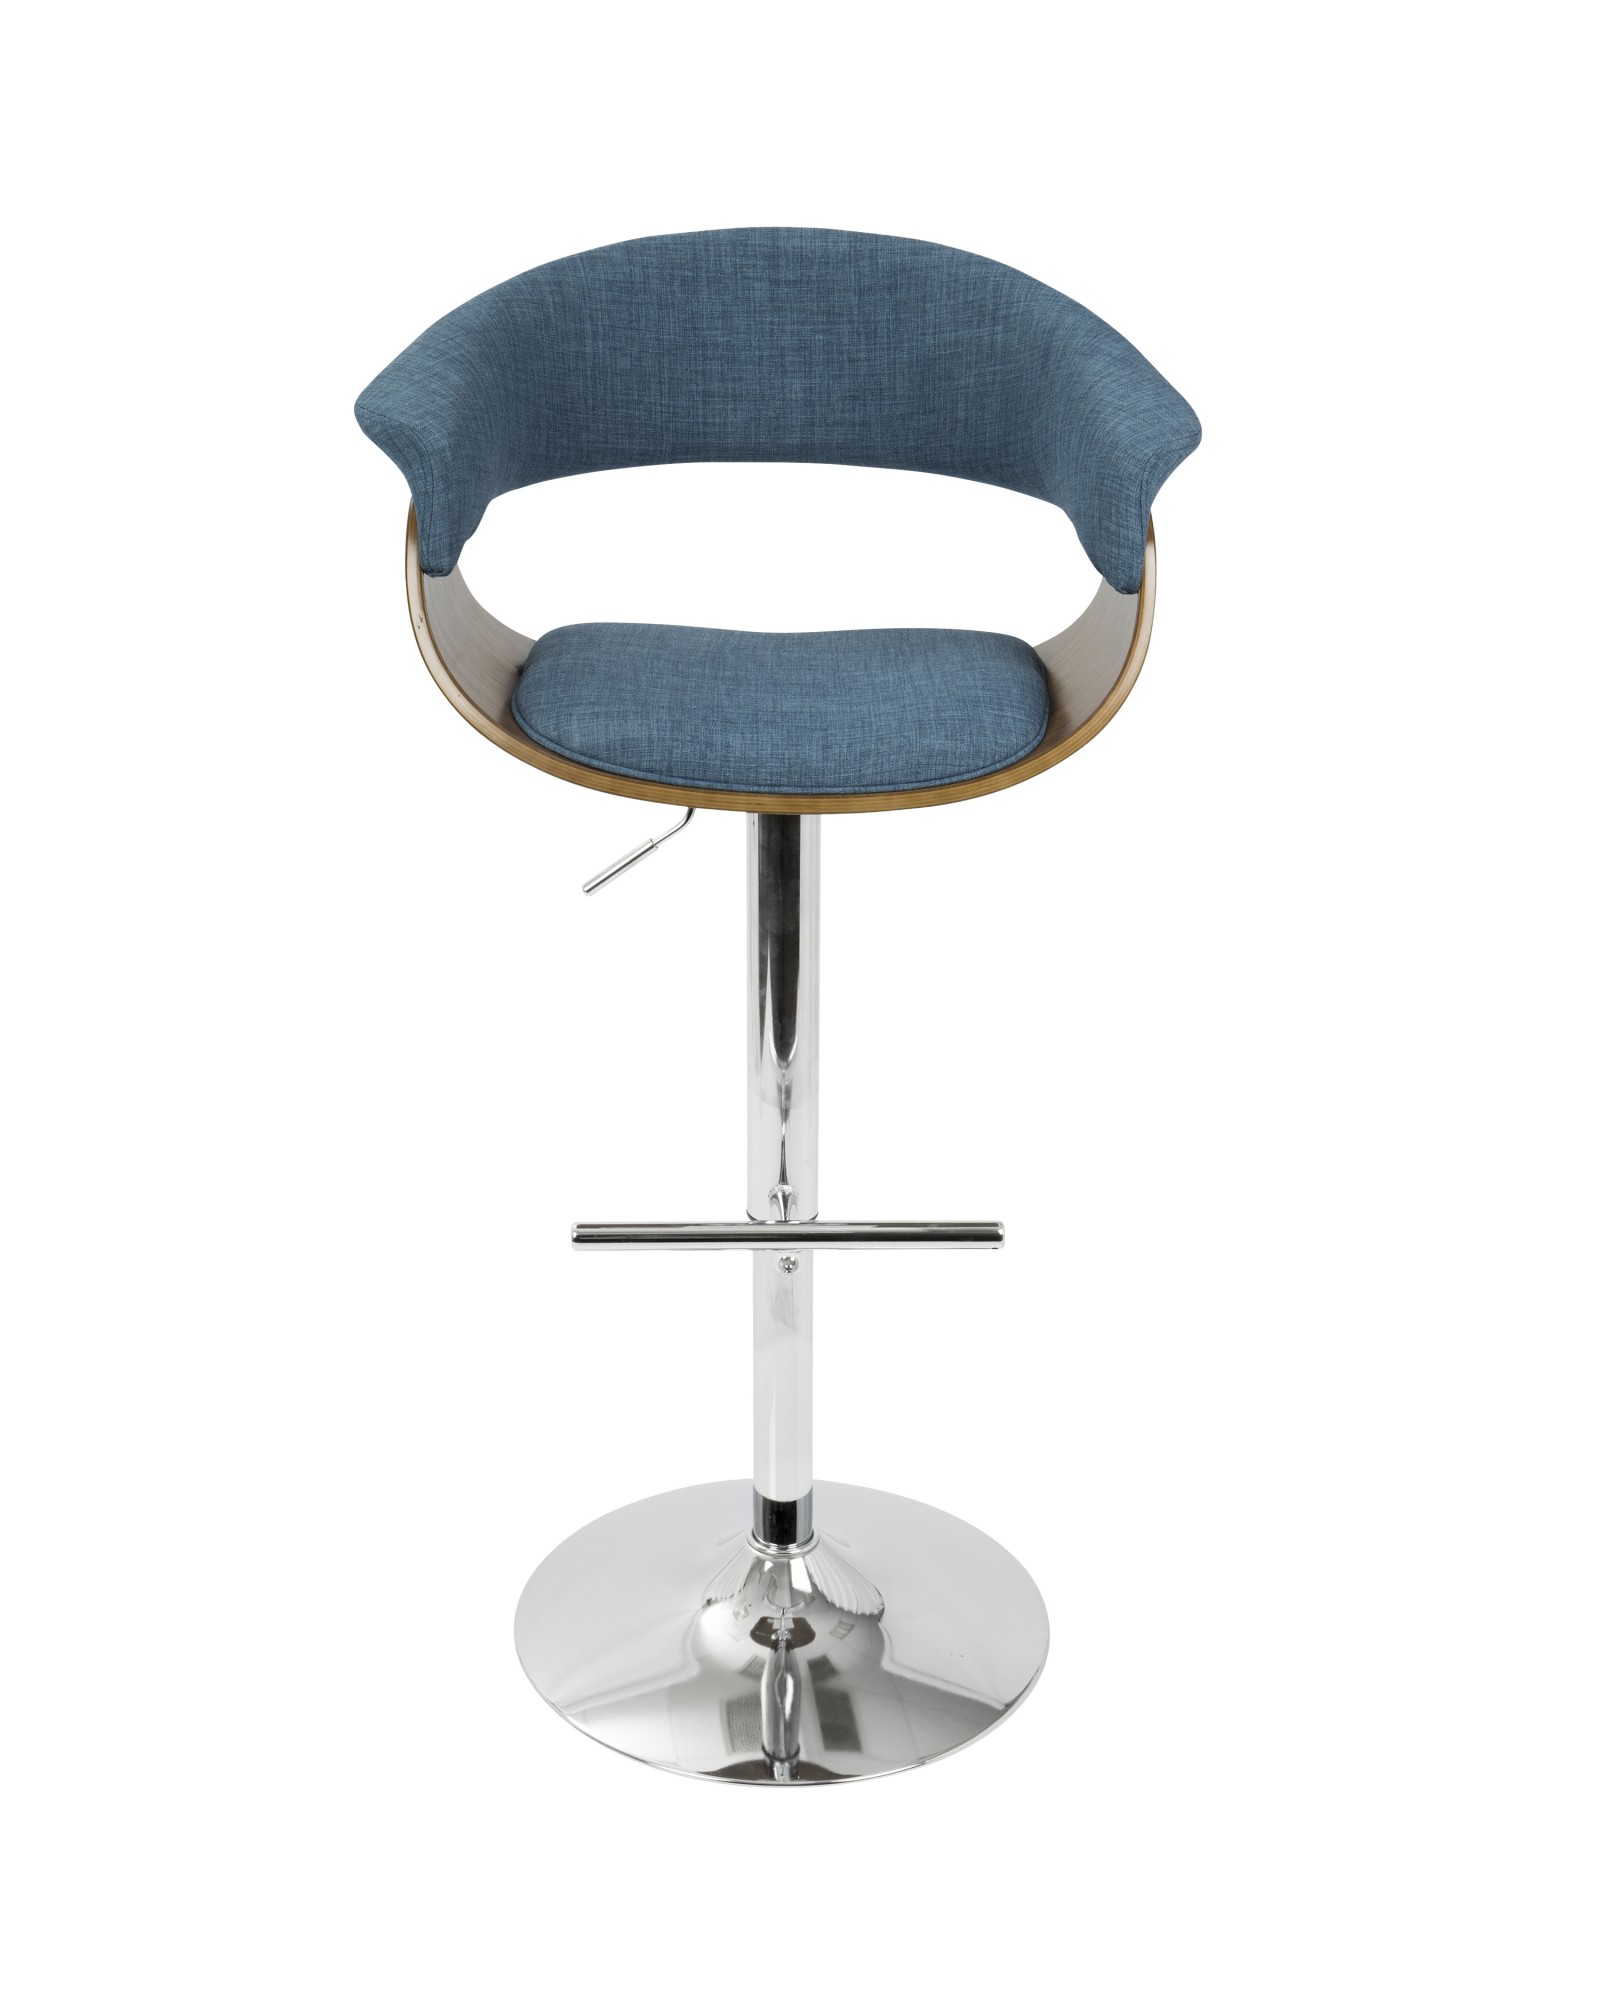 Vintage Mod Mid-Century Modern Adjustable Barstool with Swivel in Walnut and Blue Fabric